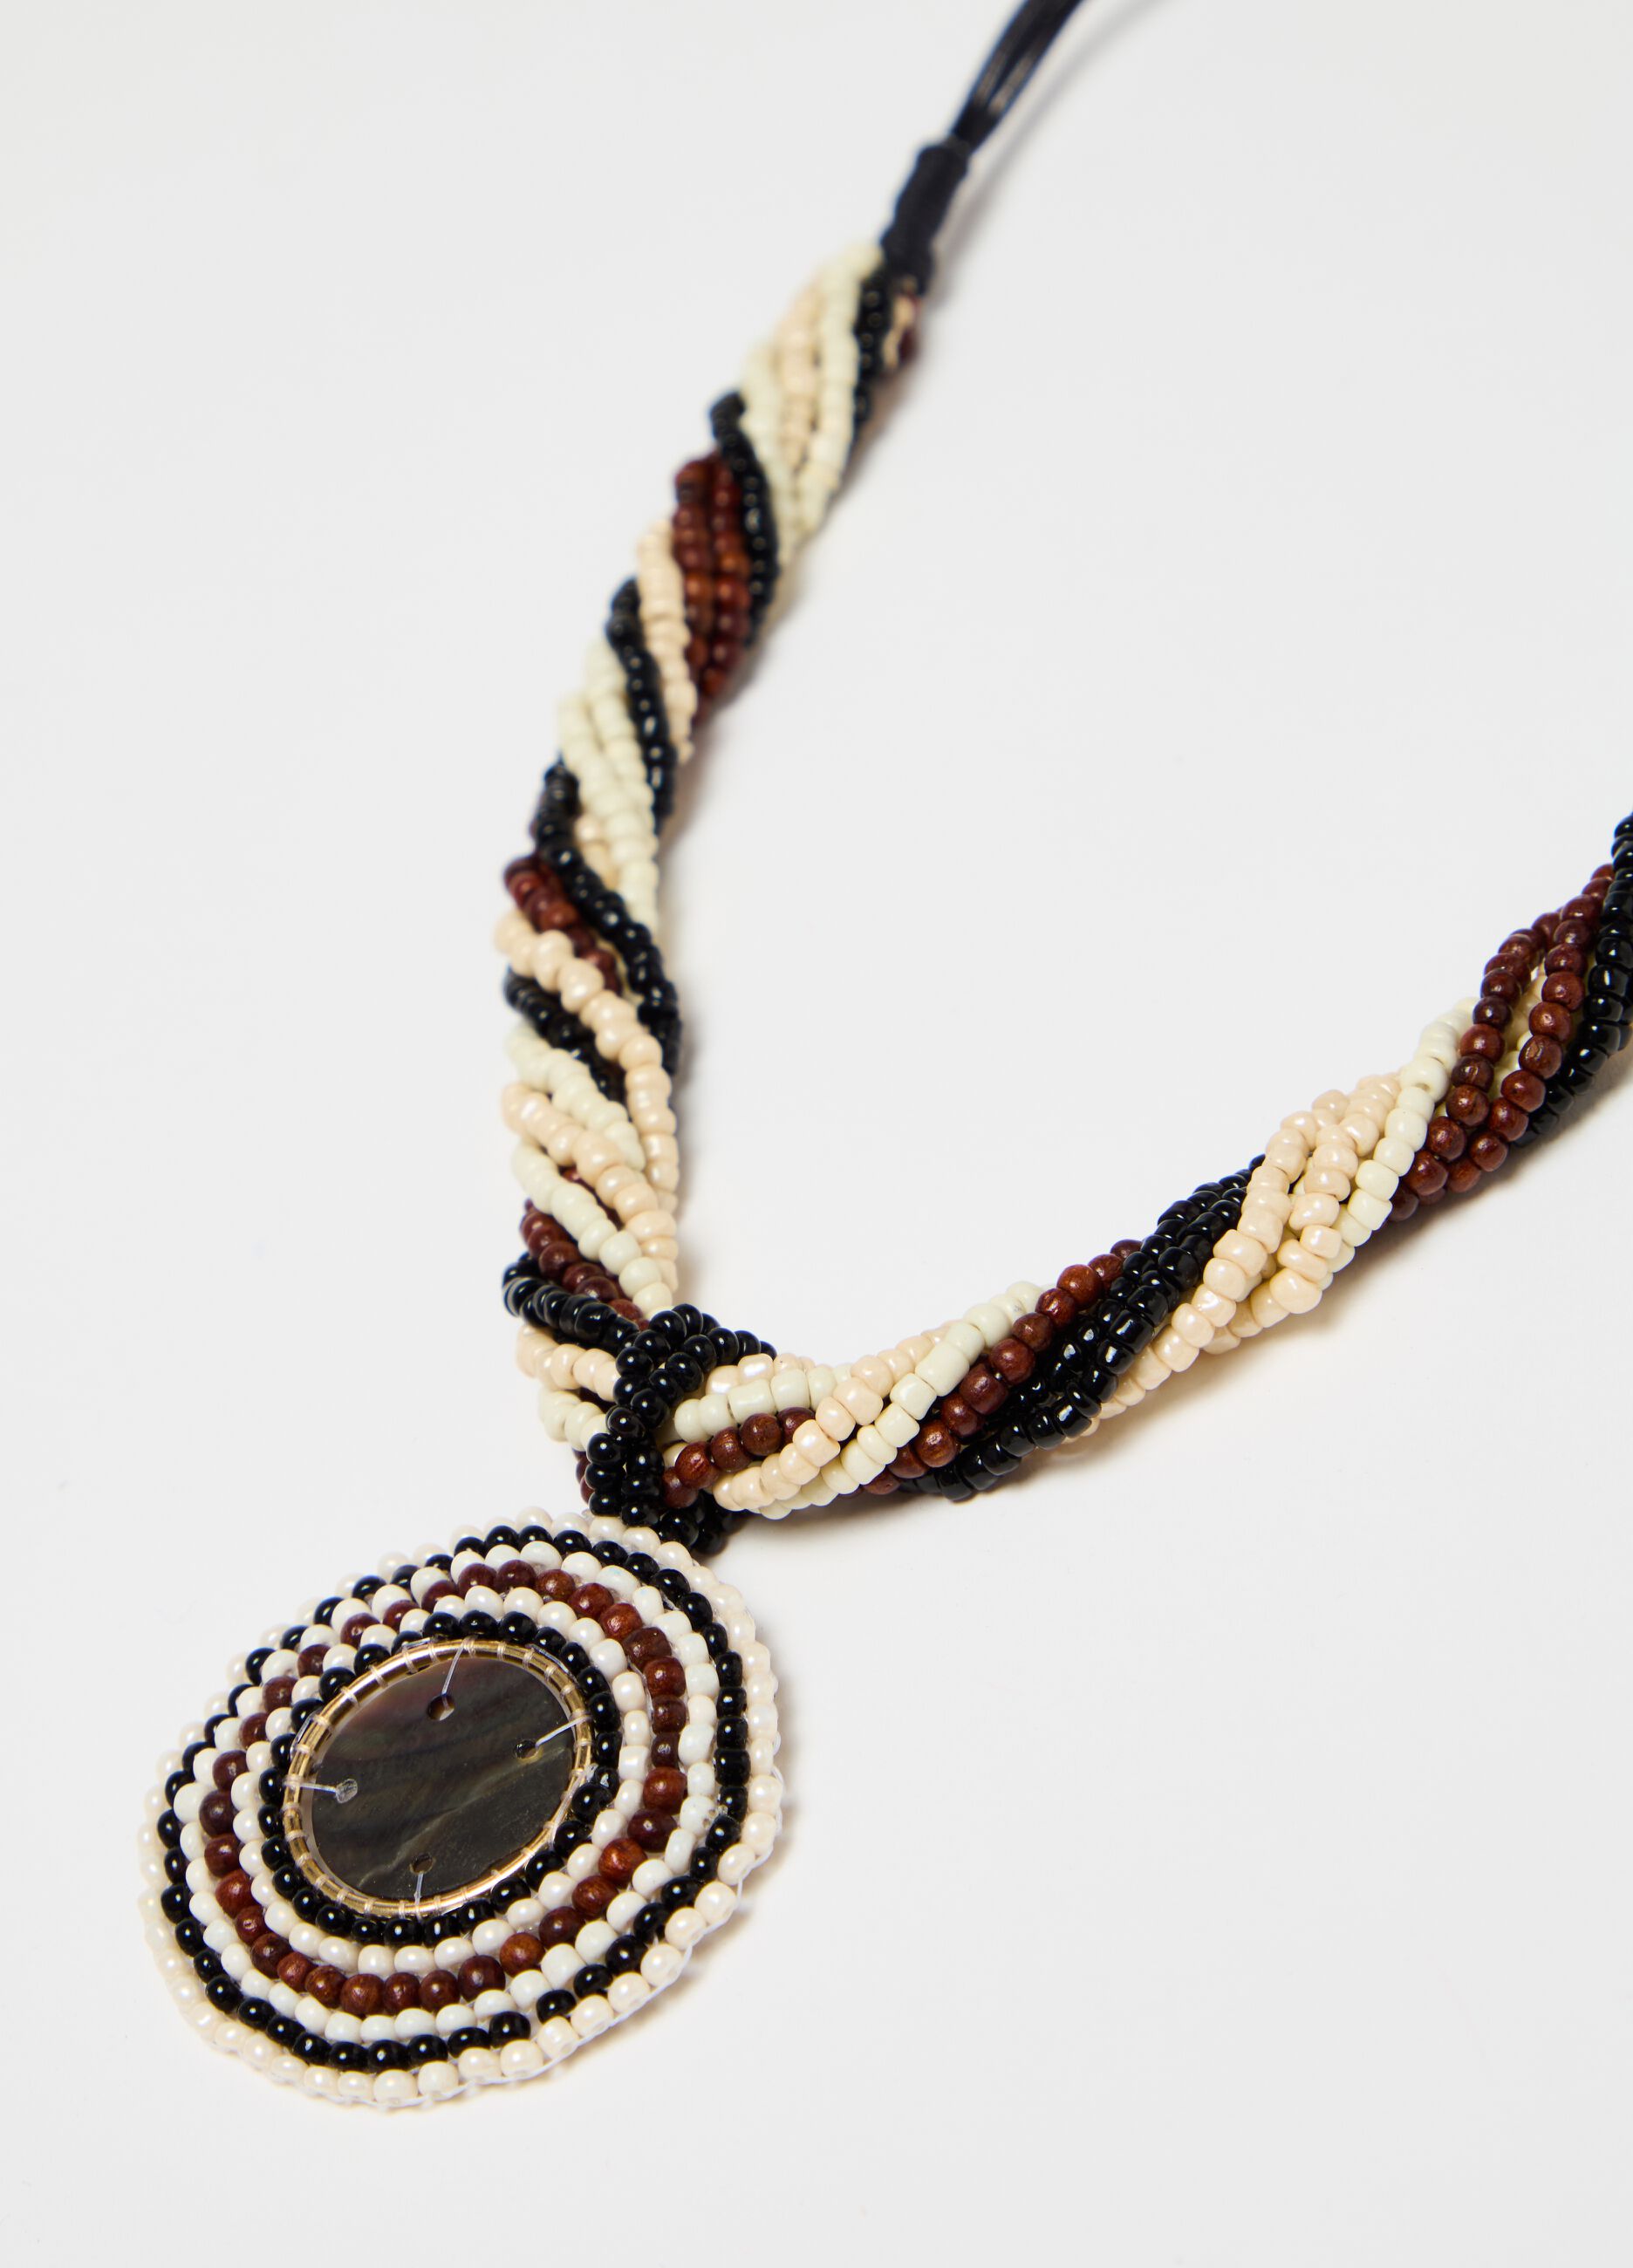 Necklace with twisted beads and pendant